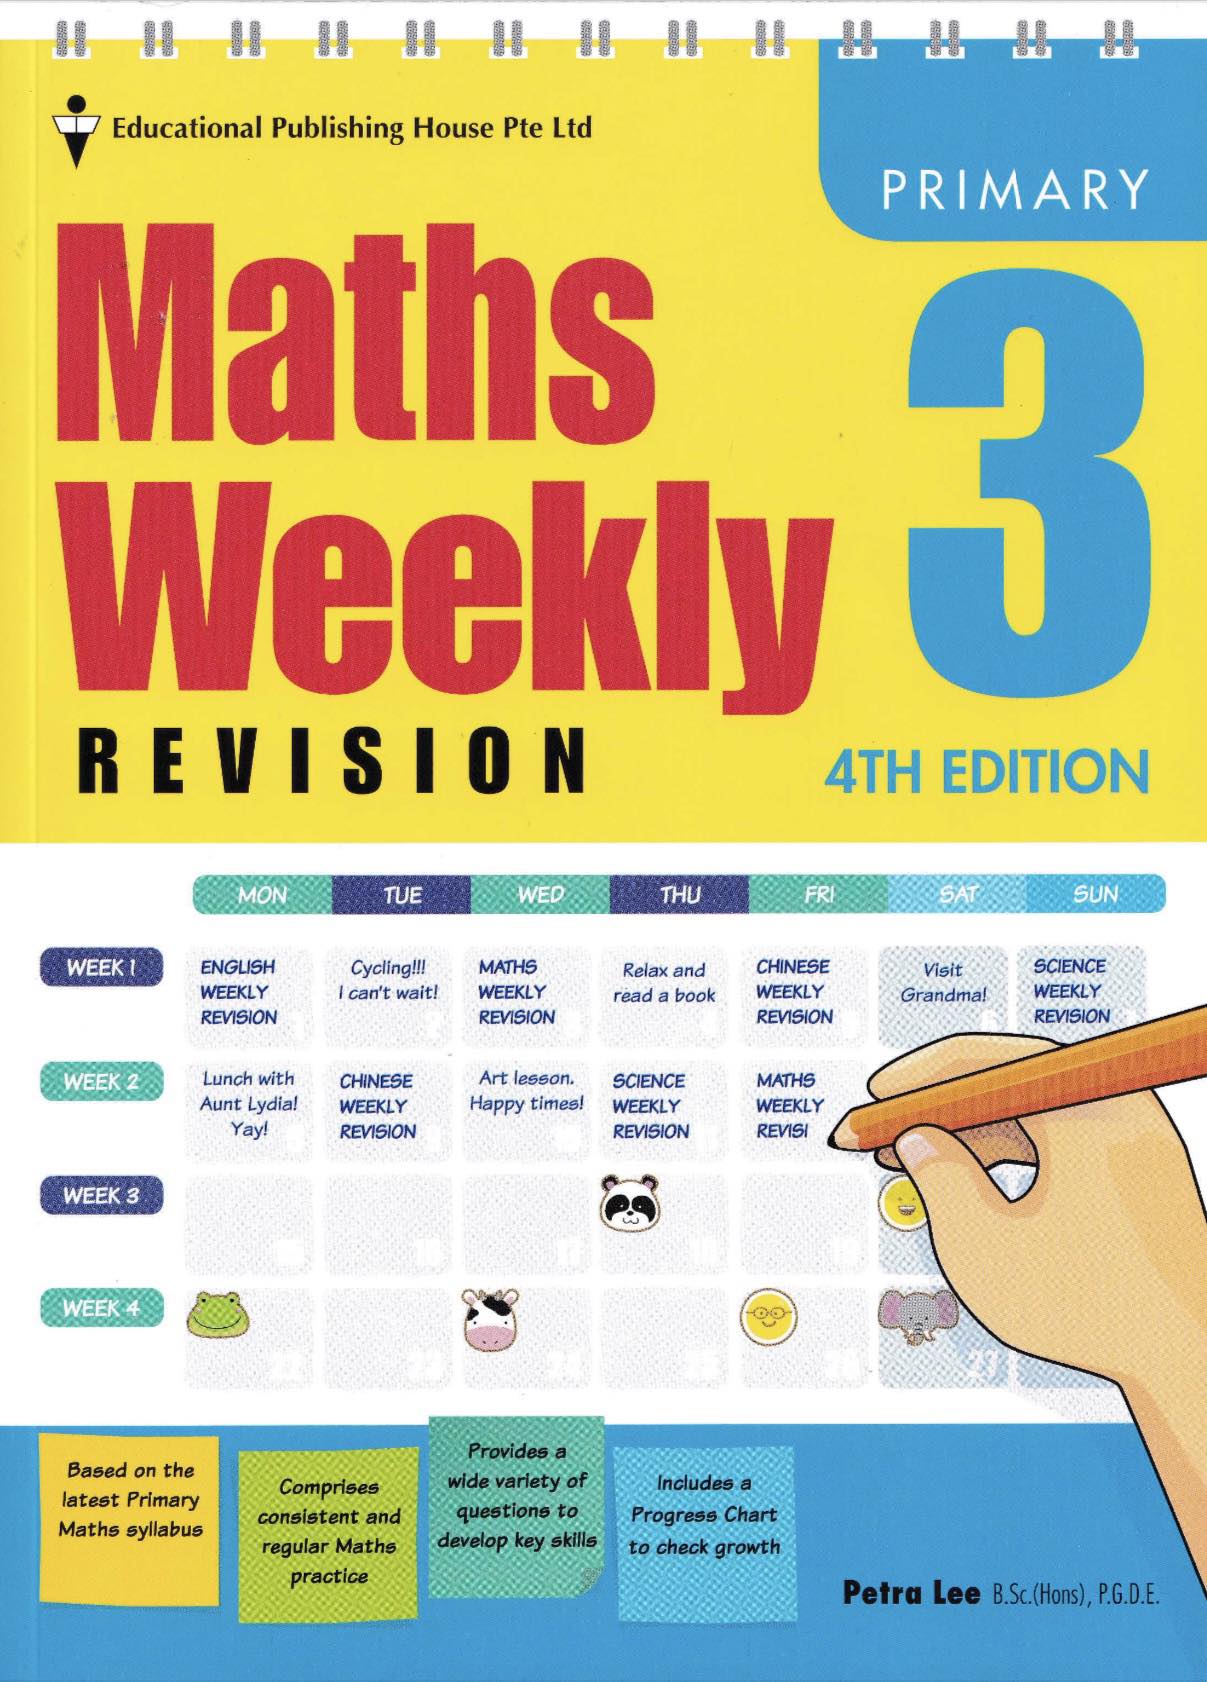 Maths Weekly Revision for Primary Levels